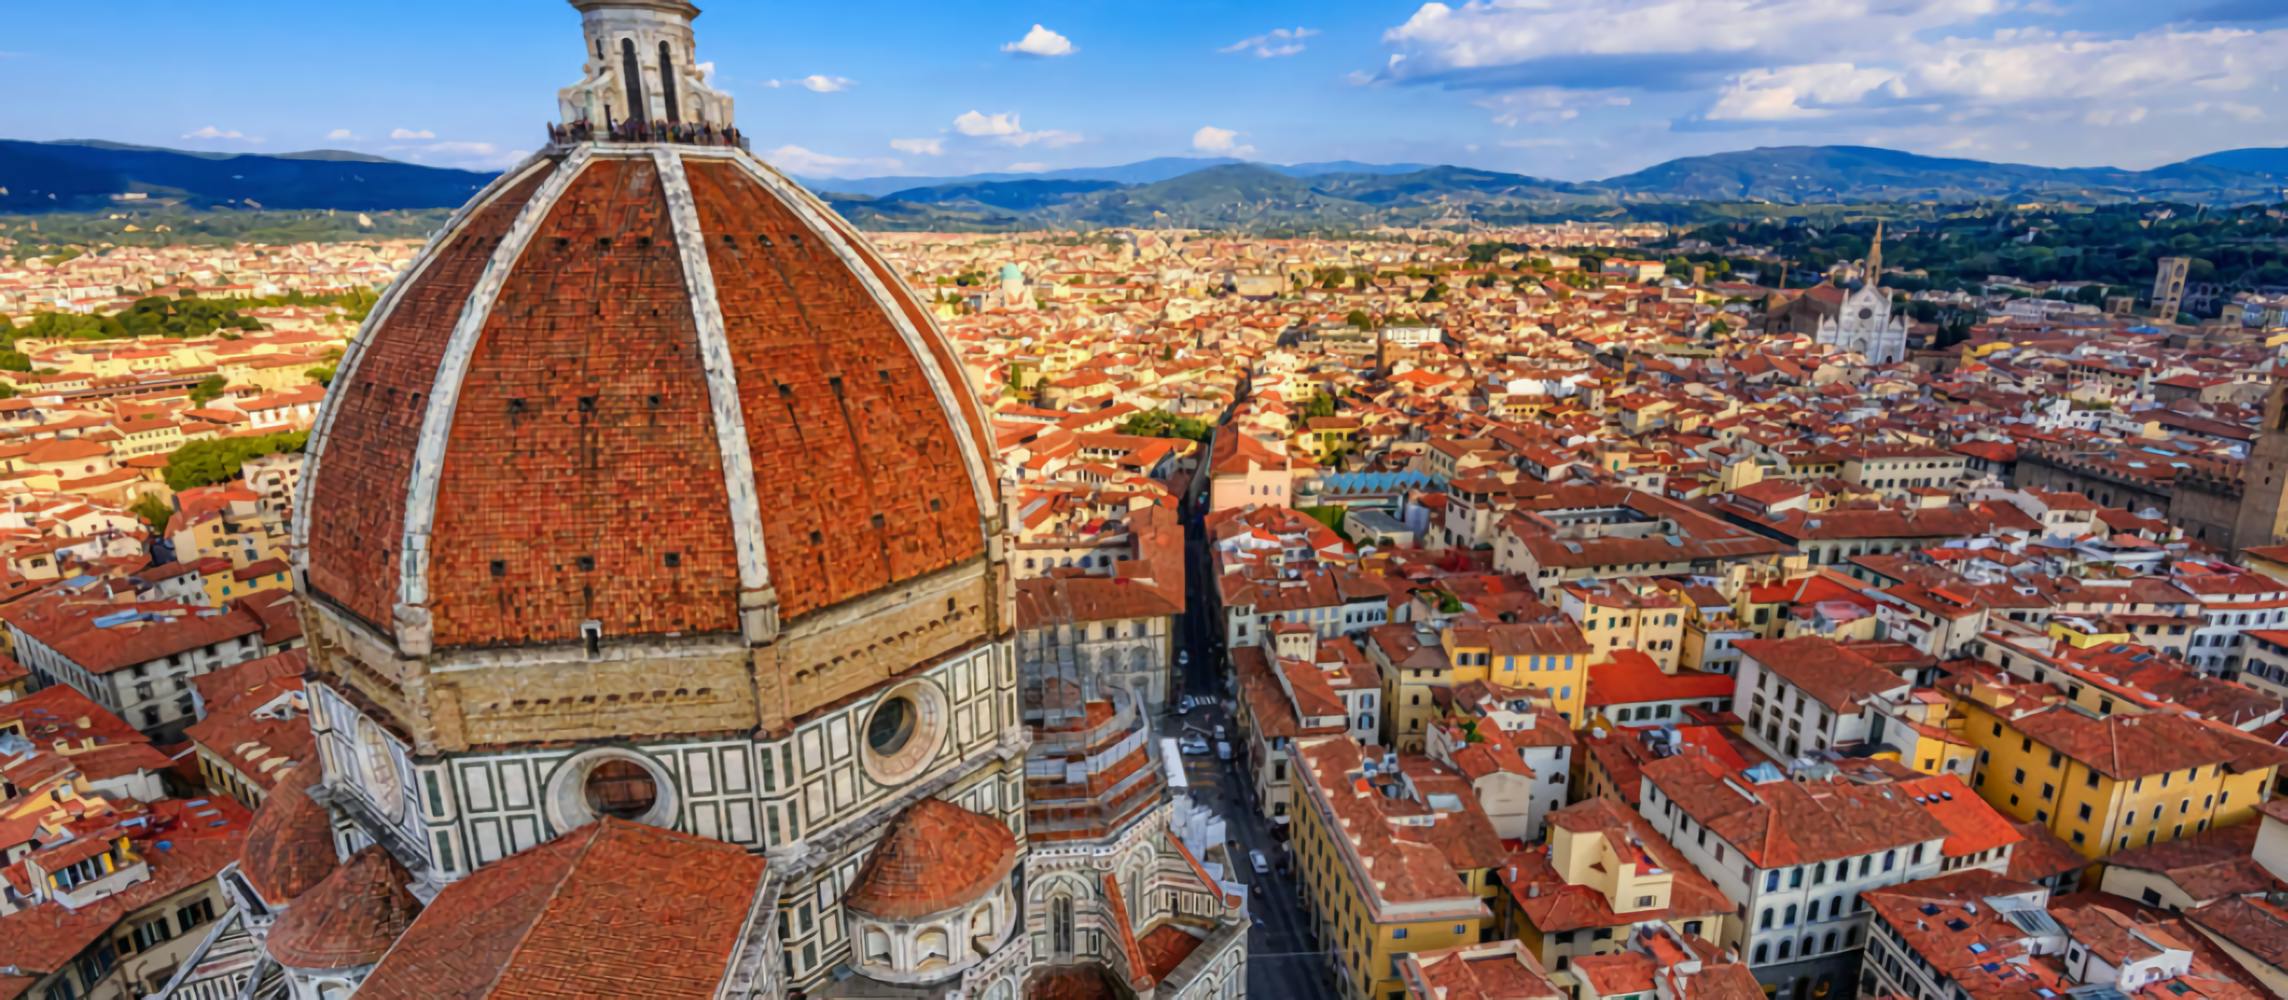 Florence Cathedral small-group tour with skip-the-line tickets